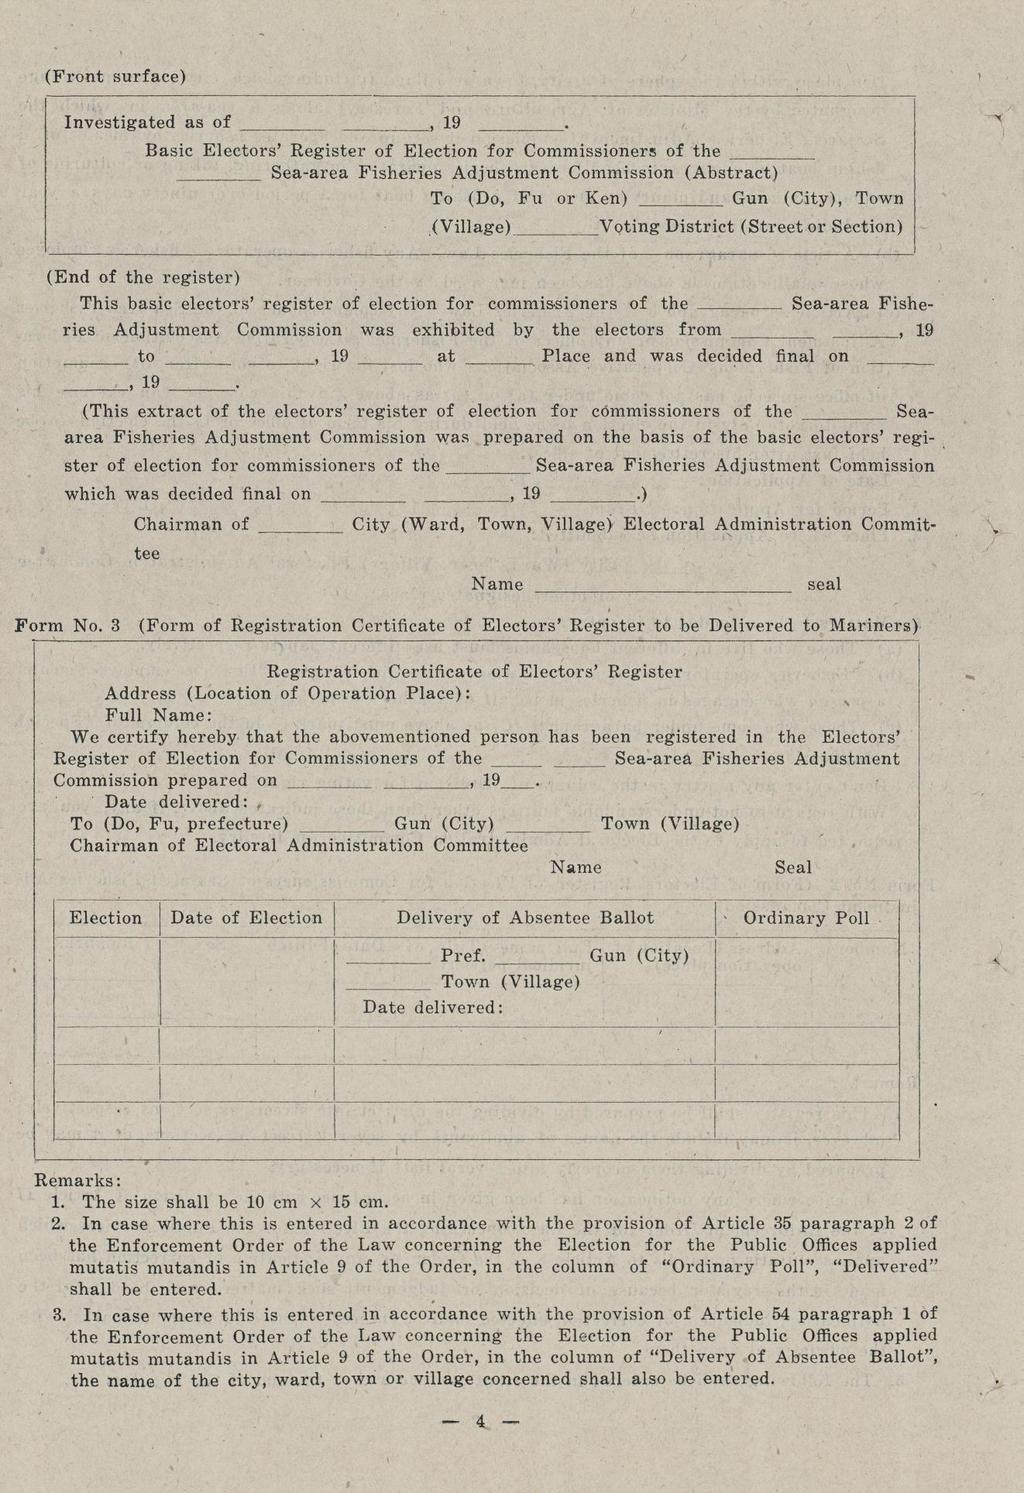 (End of the register) This basic electors' register of election for commissioners of the Sea-area Fisheries Adjustment Commission was exhibited by the electors from,19 to, 19 at Place and was decided